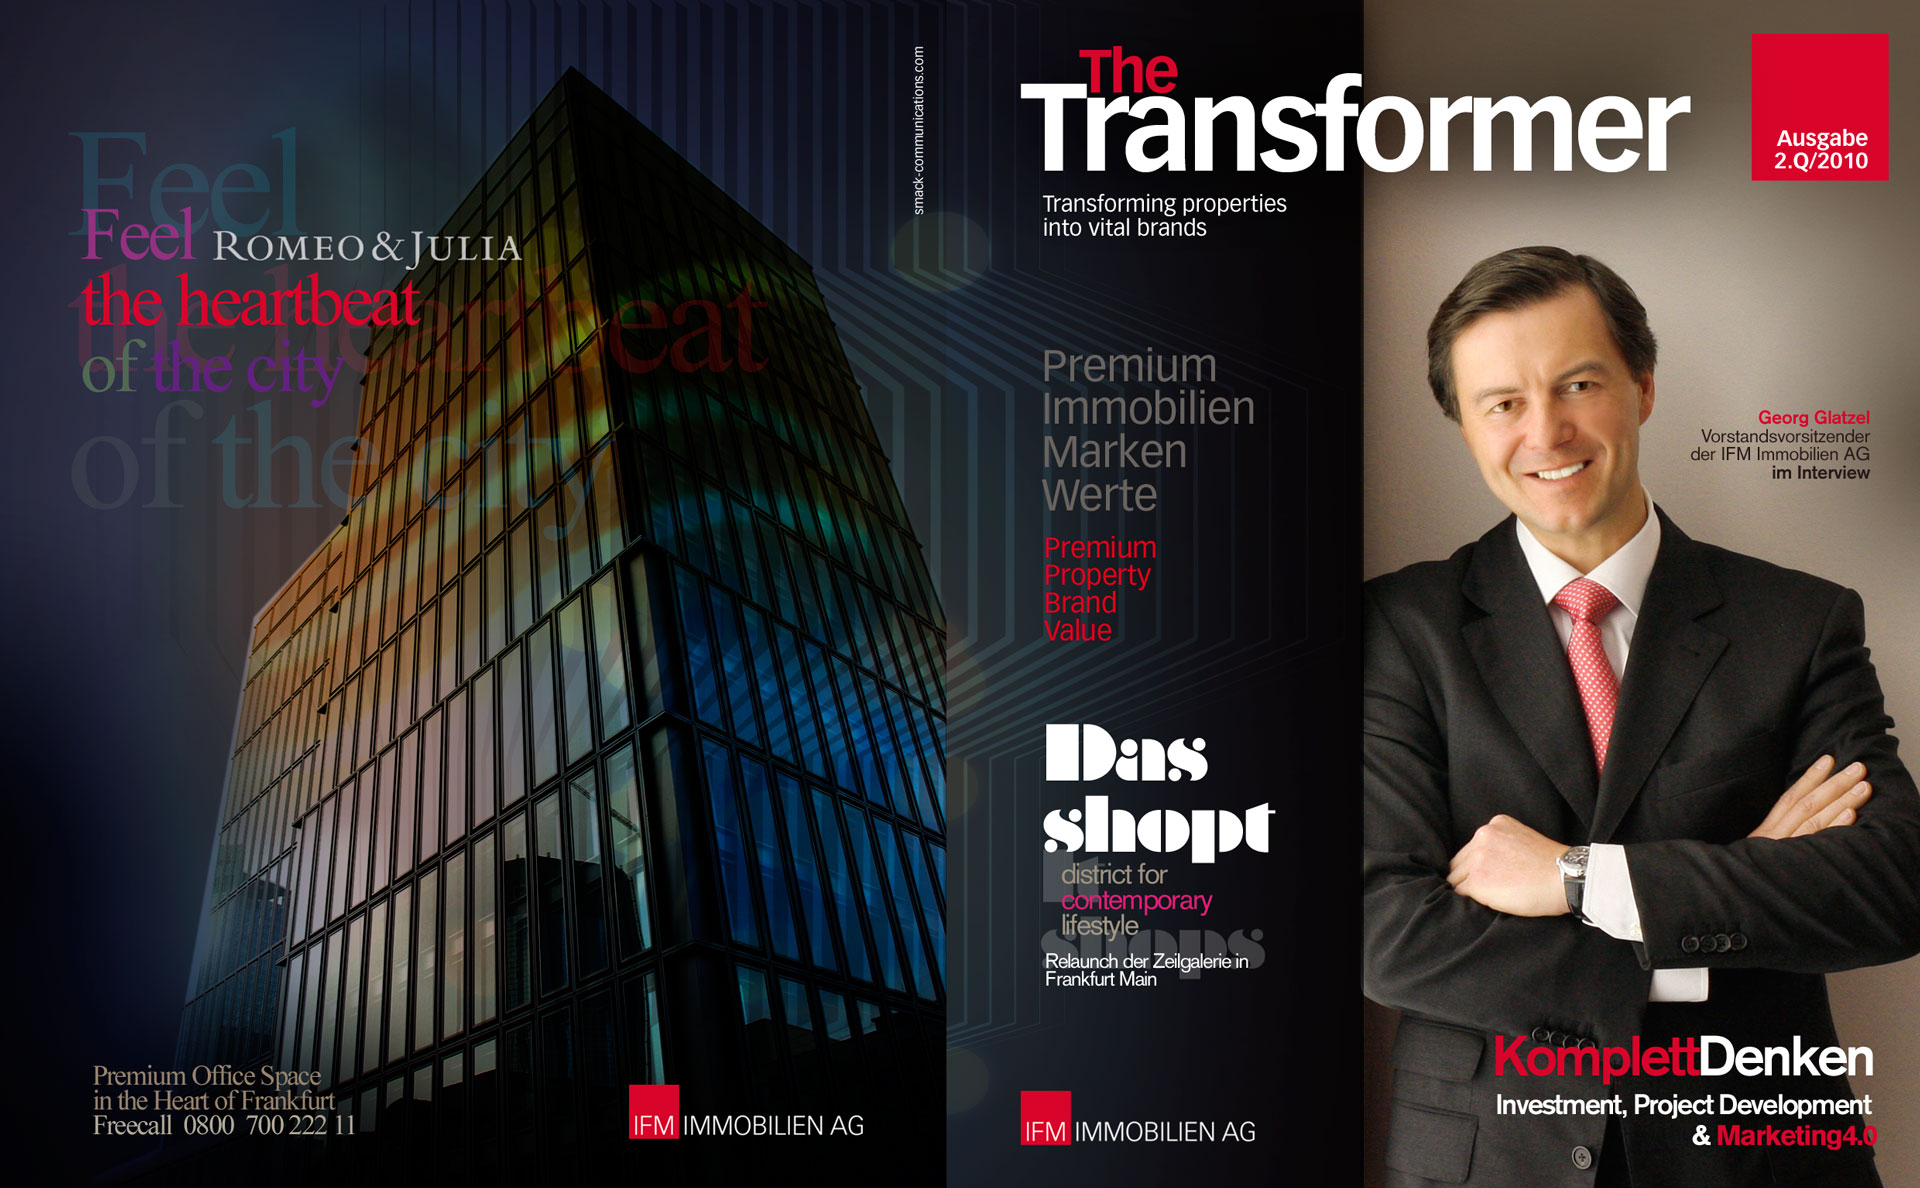 IFM Immobilien – The Transformer